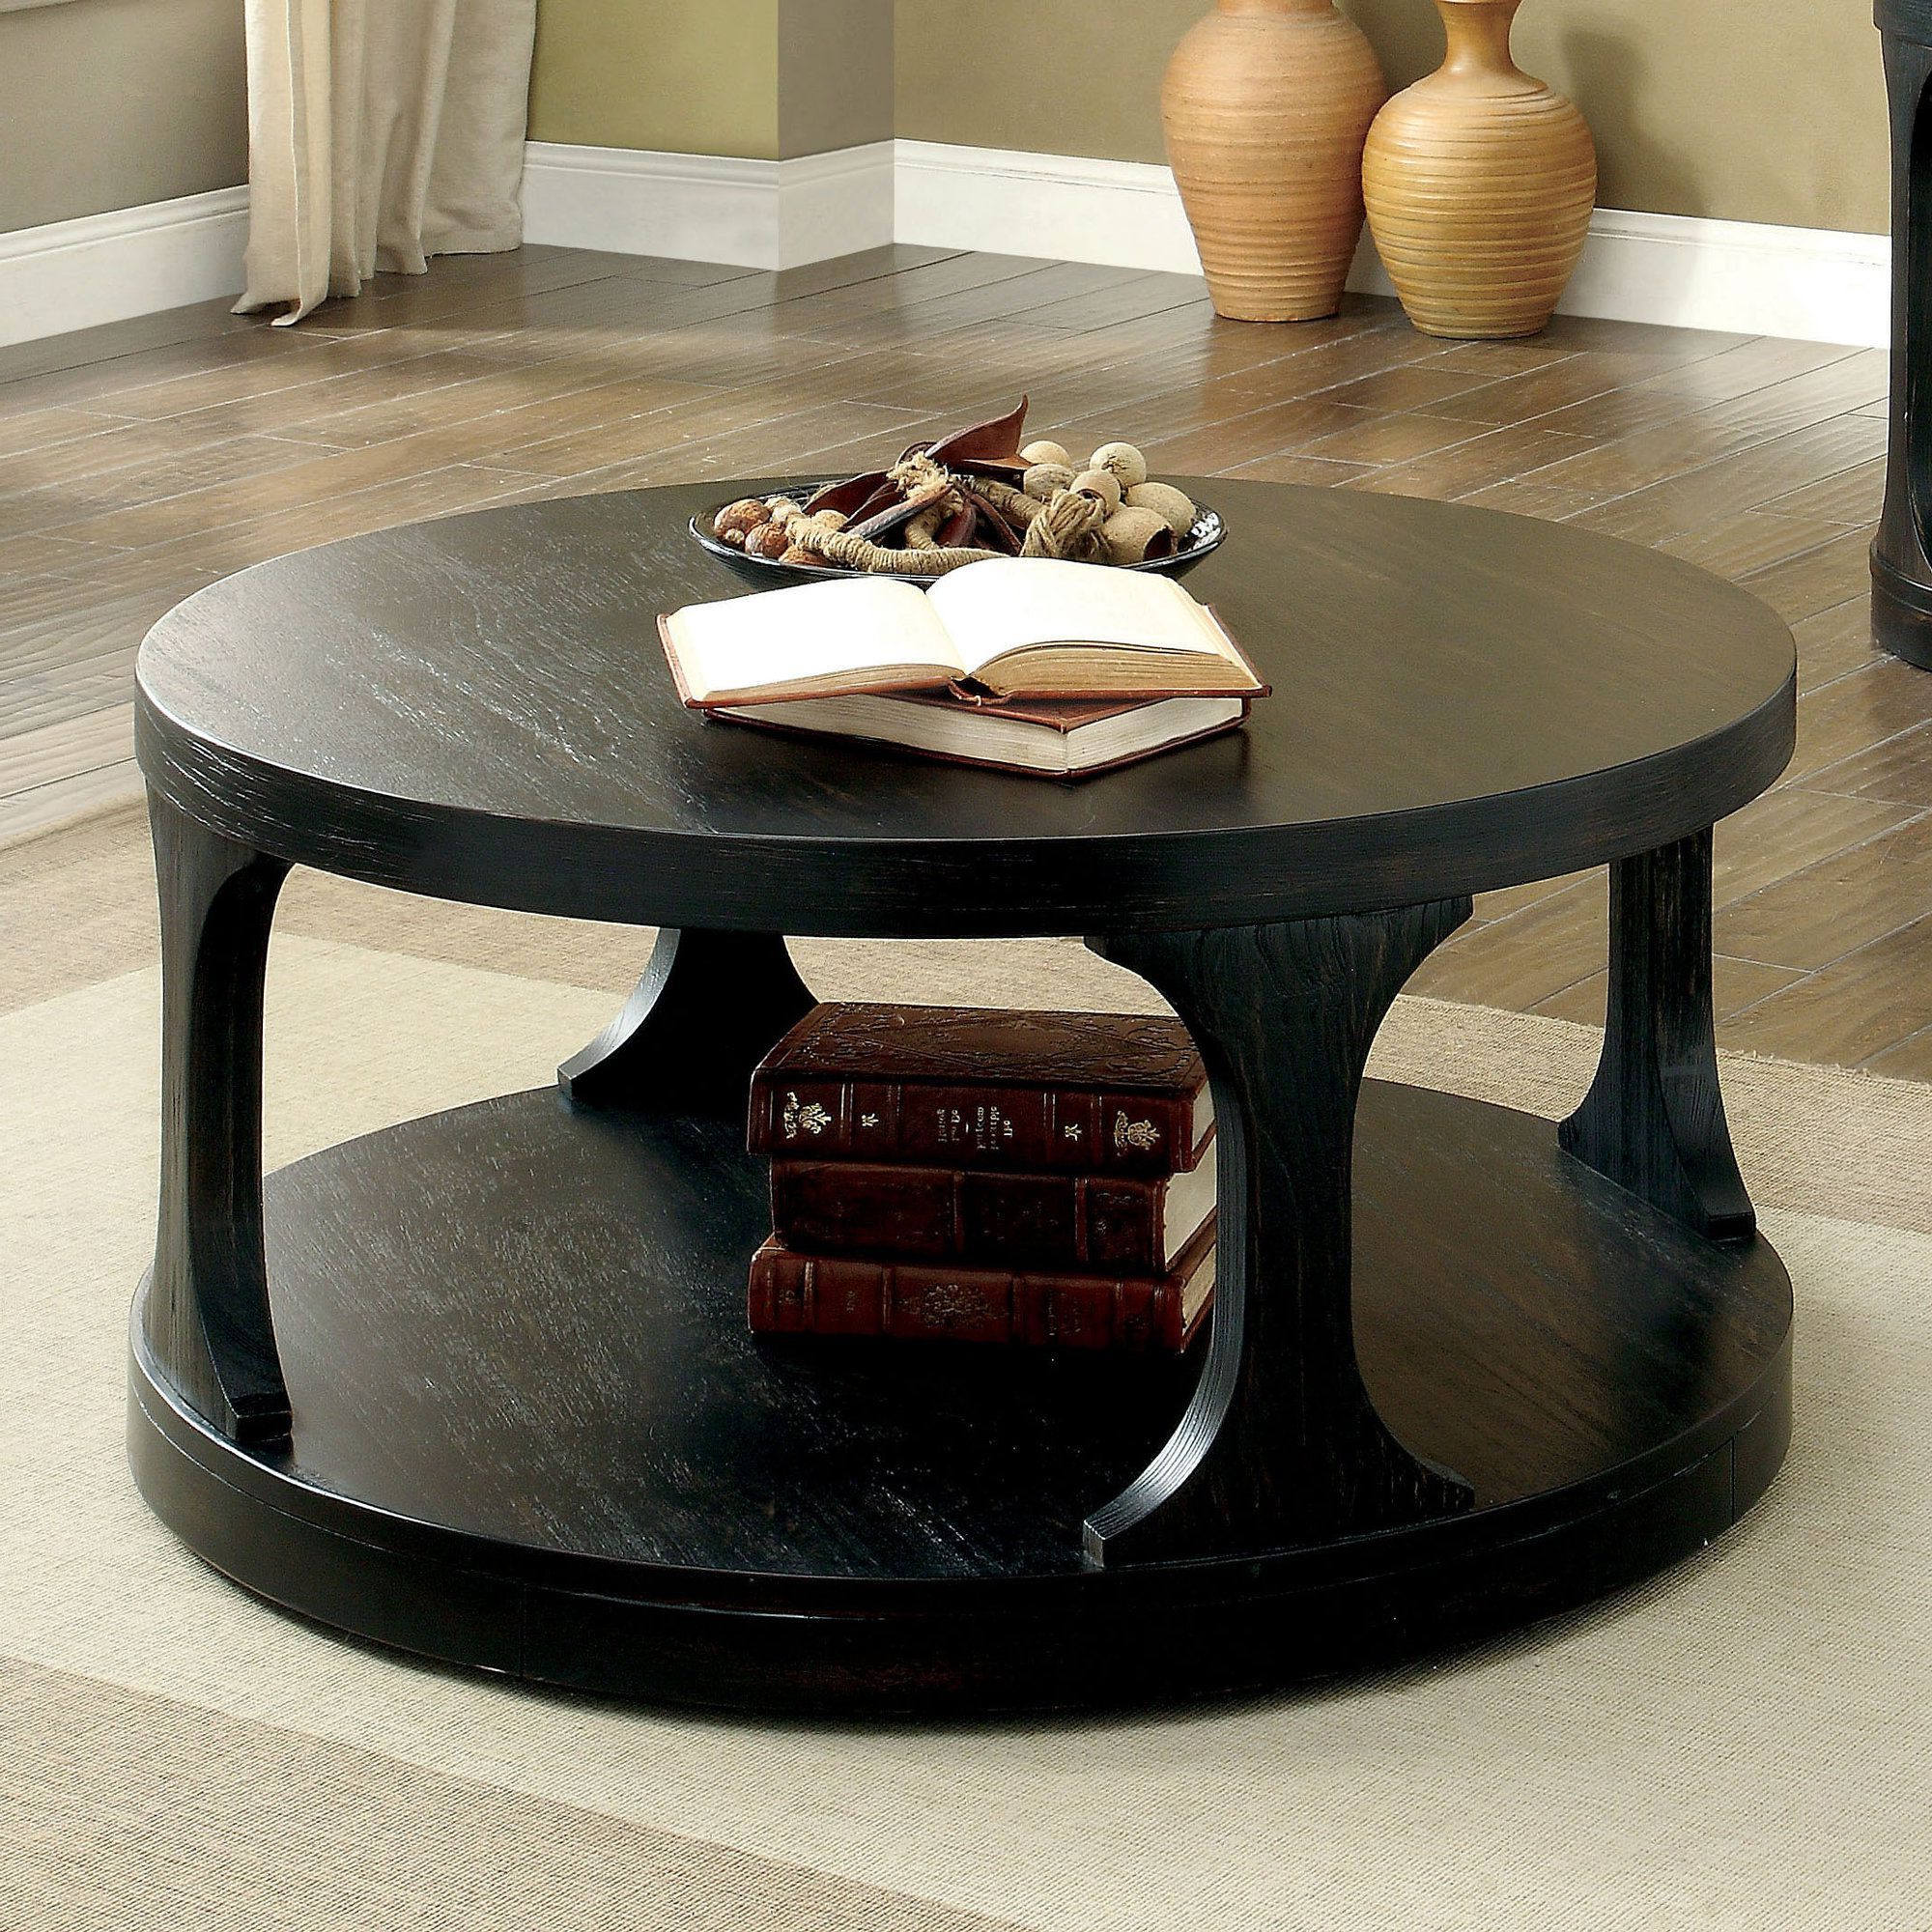 Bring A Touch Of Elegance To Your Home With A Black Circle Coffee Table Inside Full Black Round Coffee Tables (View 9 of 20)